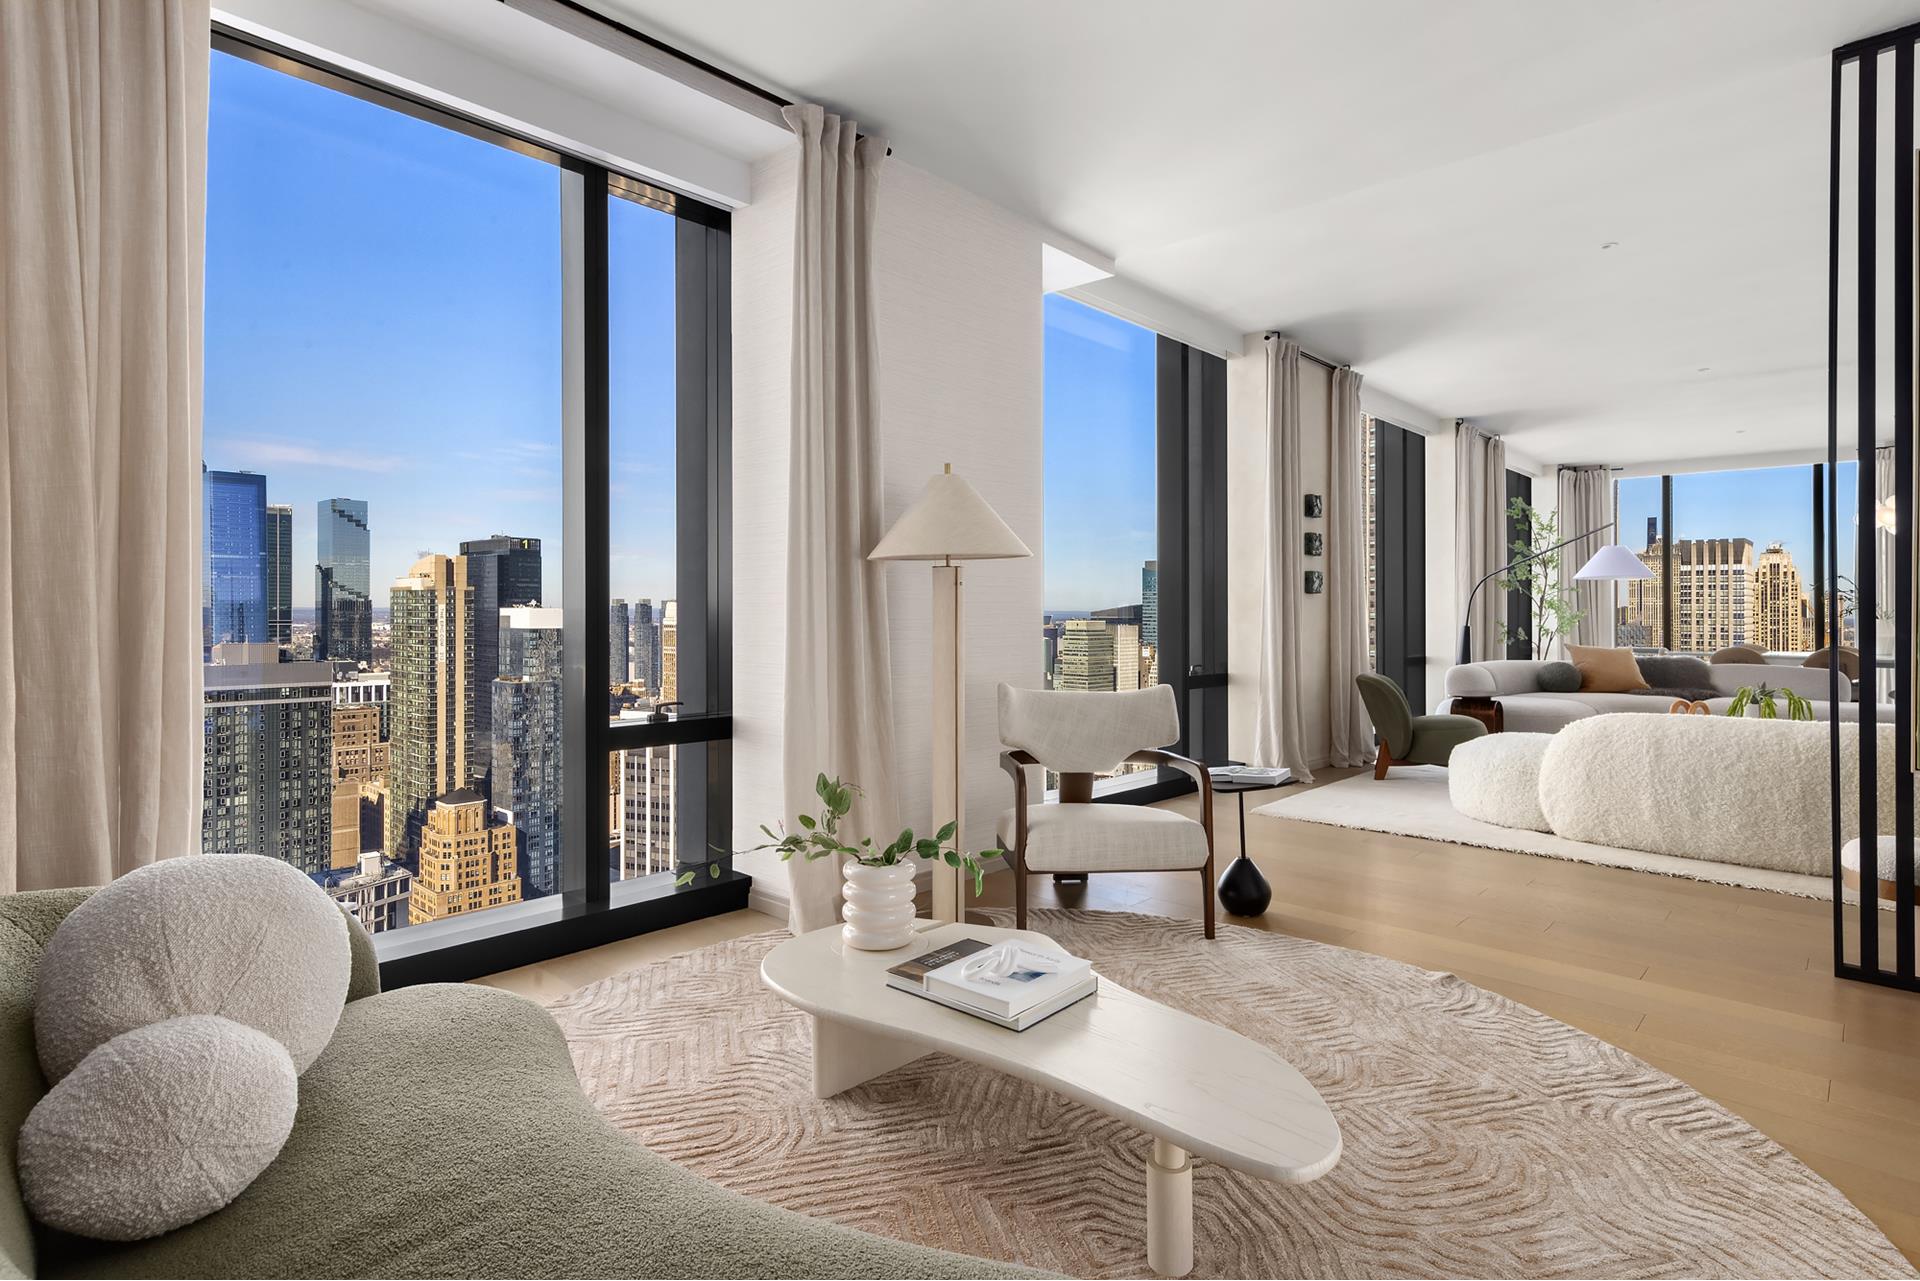 277 Fifth Ave Nomad at 277 5th Avenue in NoMad : Sales, Rentals, Floorplans